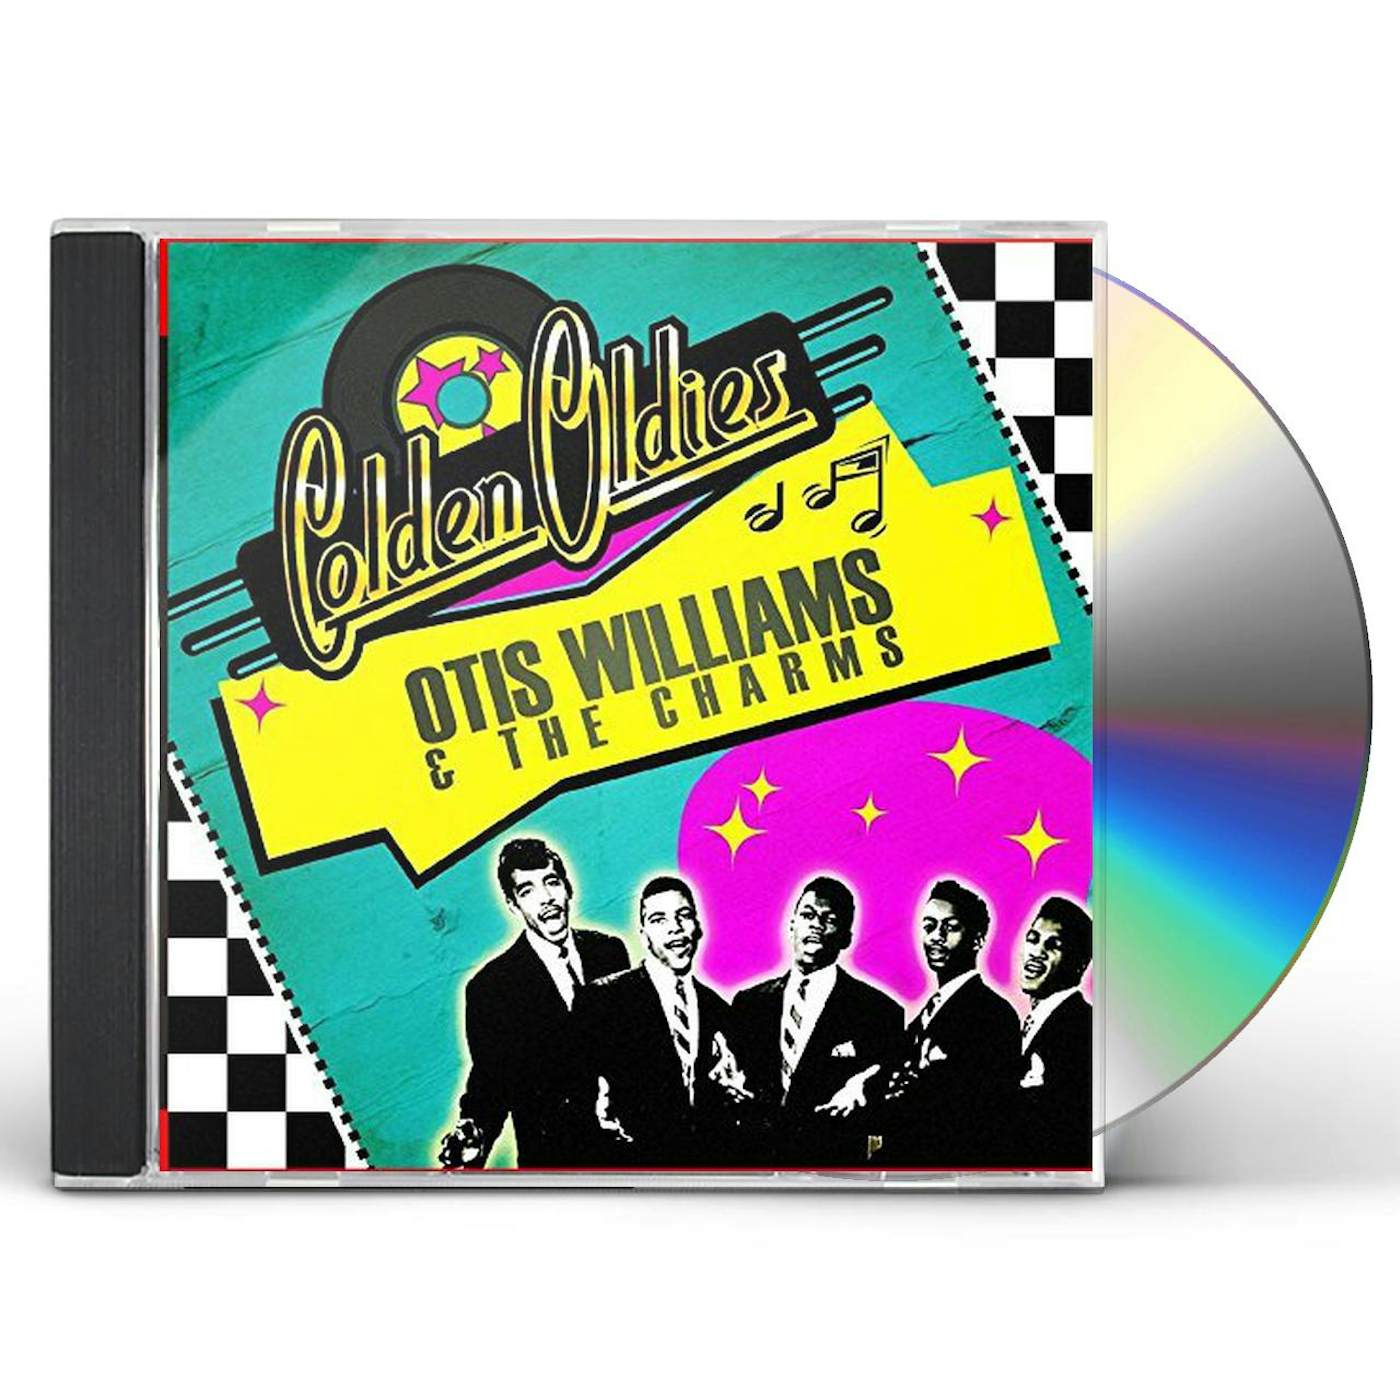 Otis Williams & The Charms GOLDEN OLDIES CD